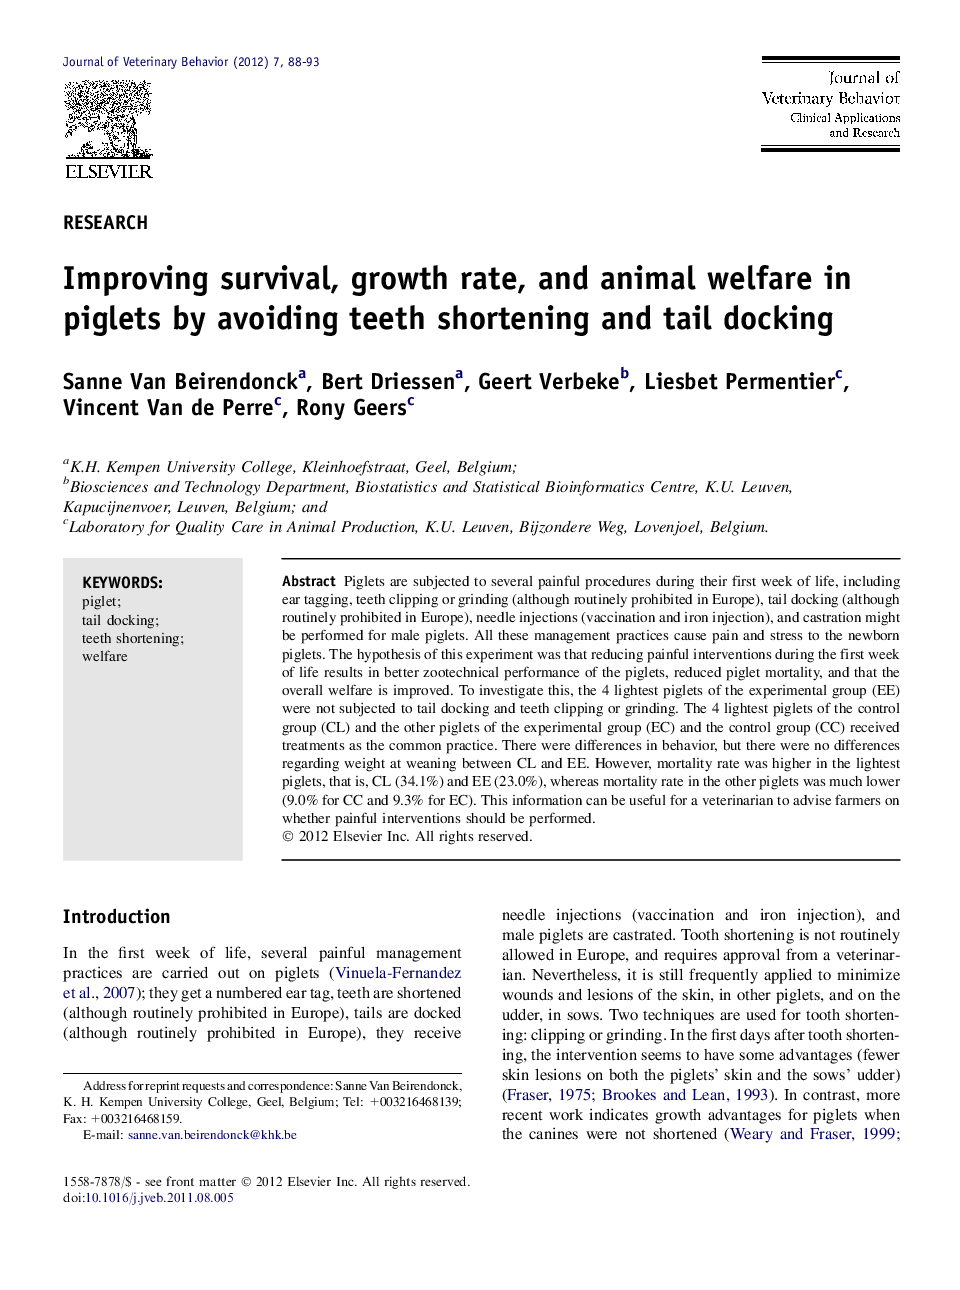 Improving survival, growth rate, and animal welfare in piglets by avoiding teeth shortening and tail docking